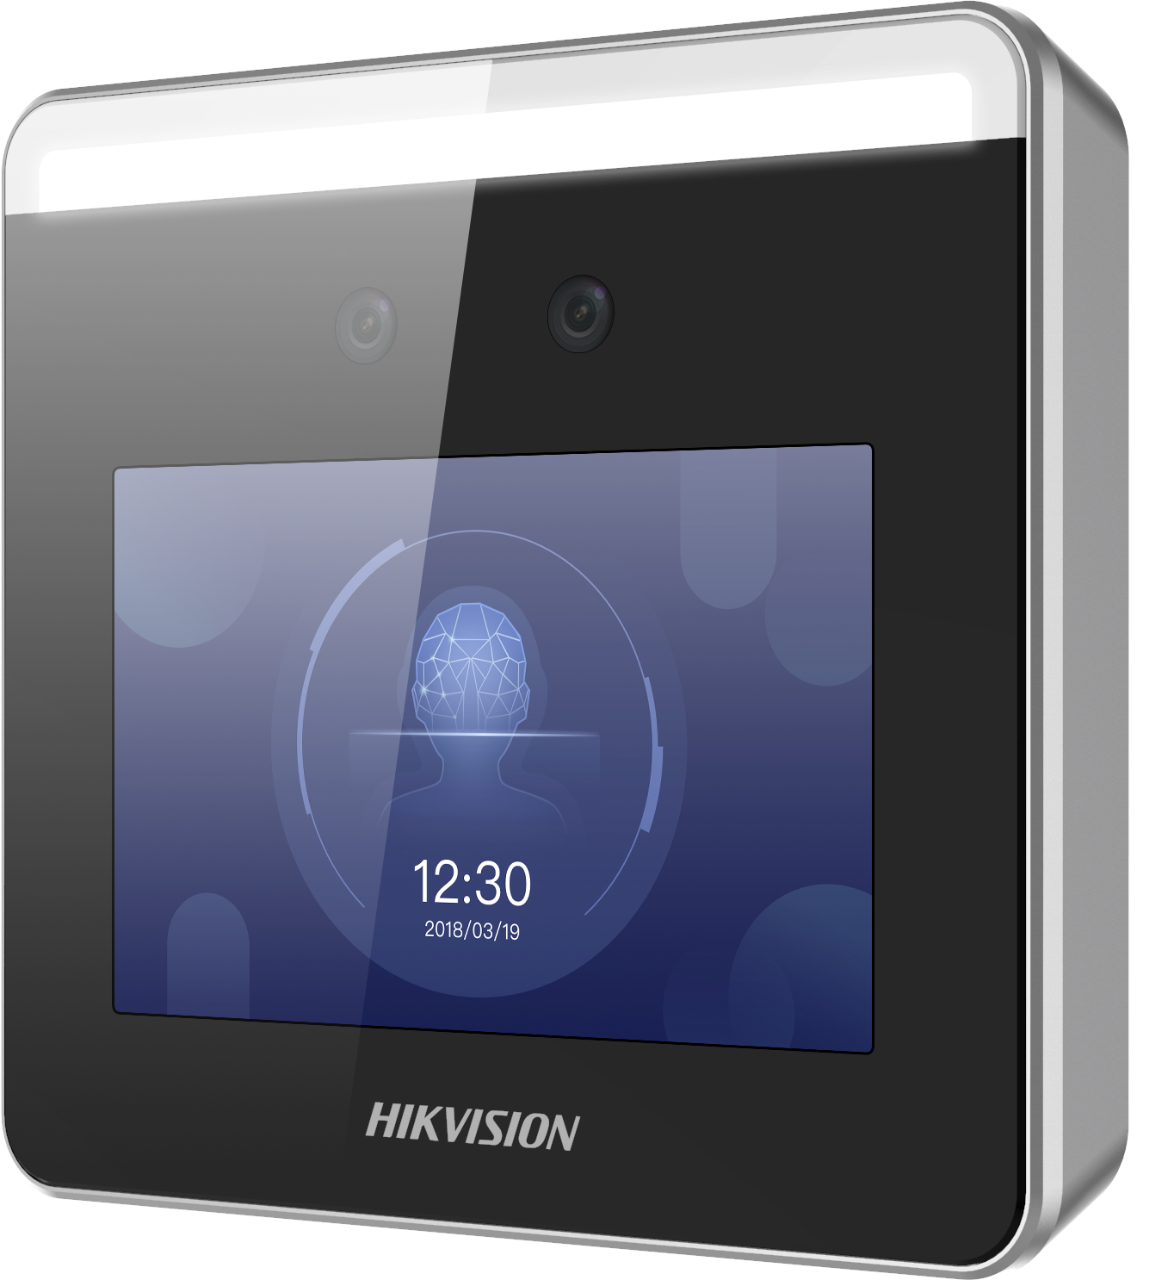 HIKVISION DS-K1T331 / Control and Face Access Terminal